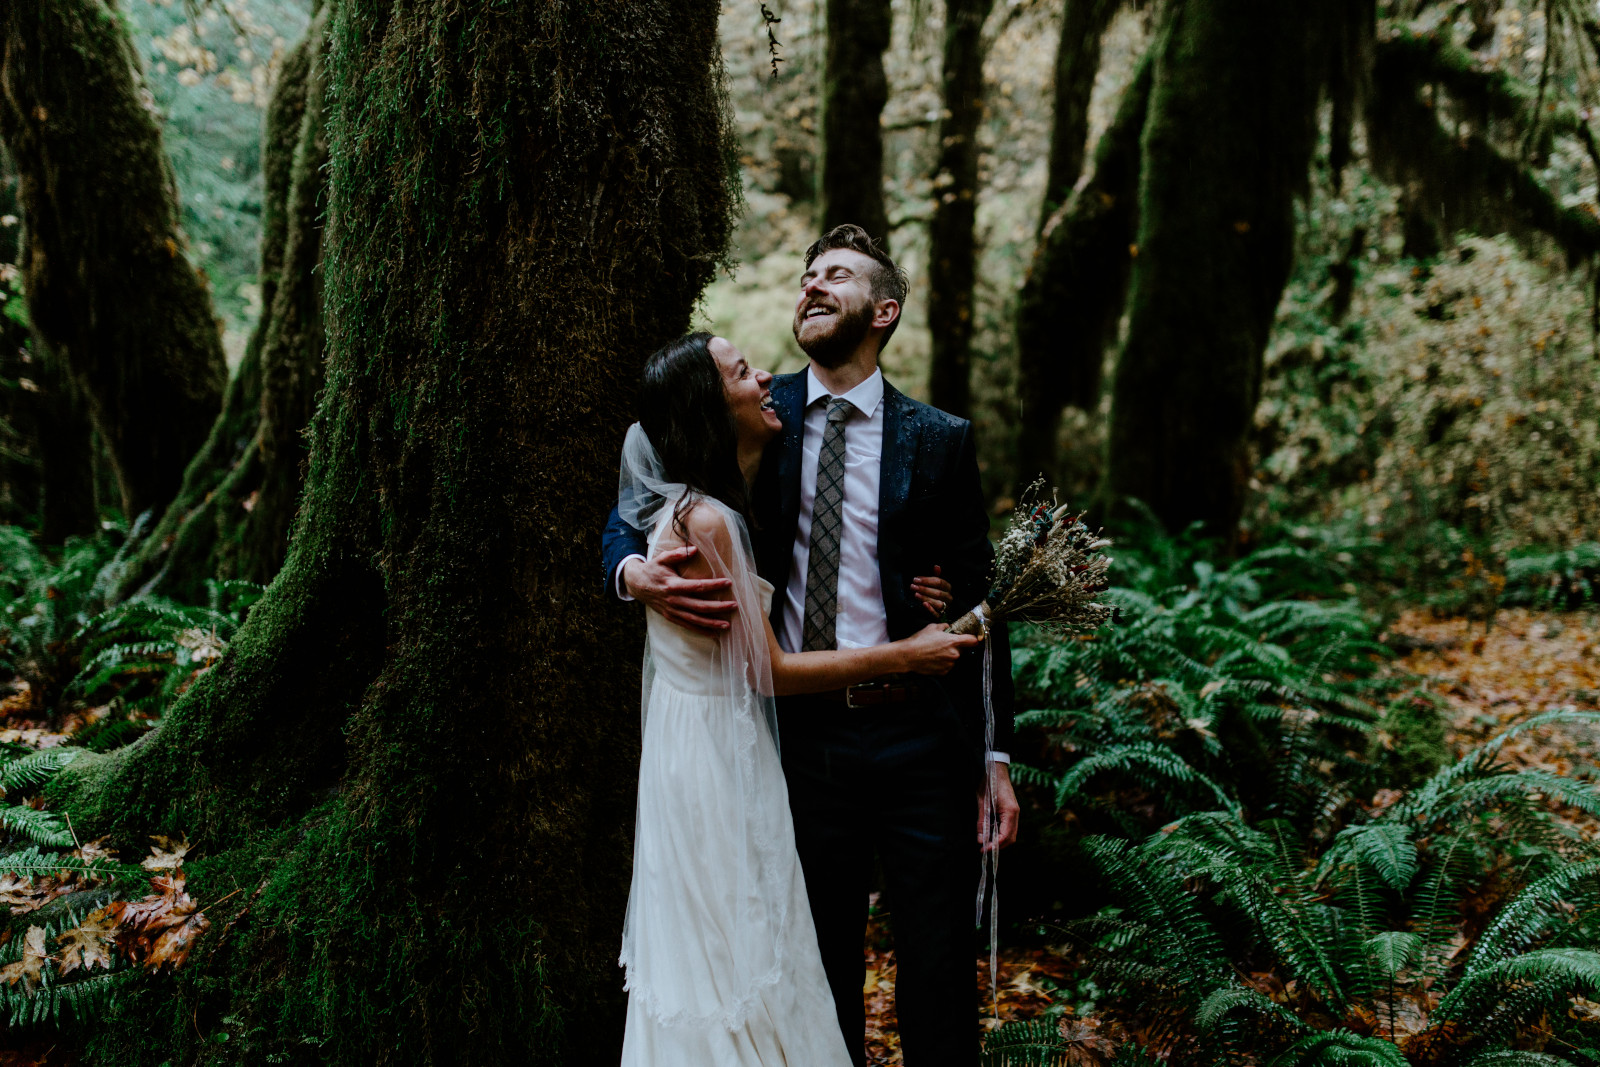 Corey and Mollie stand in the rain. Elopement photography in the Olympic National Park by Sienna Plus Josh.